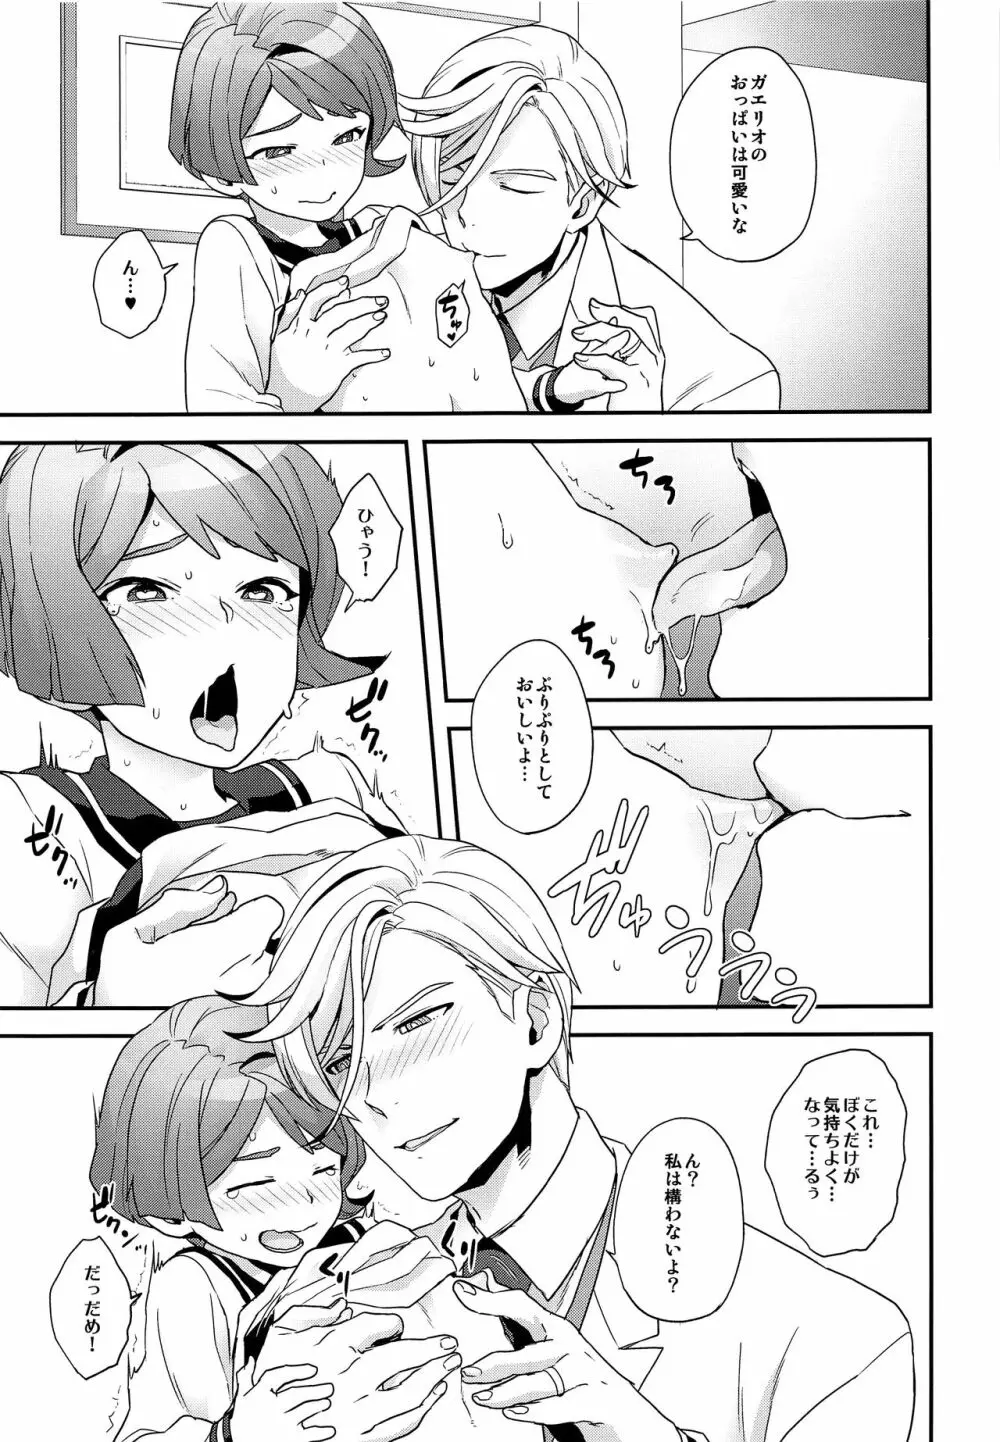 Newly married couple 18ページ